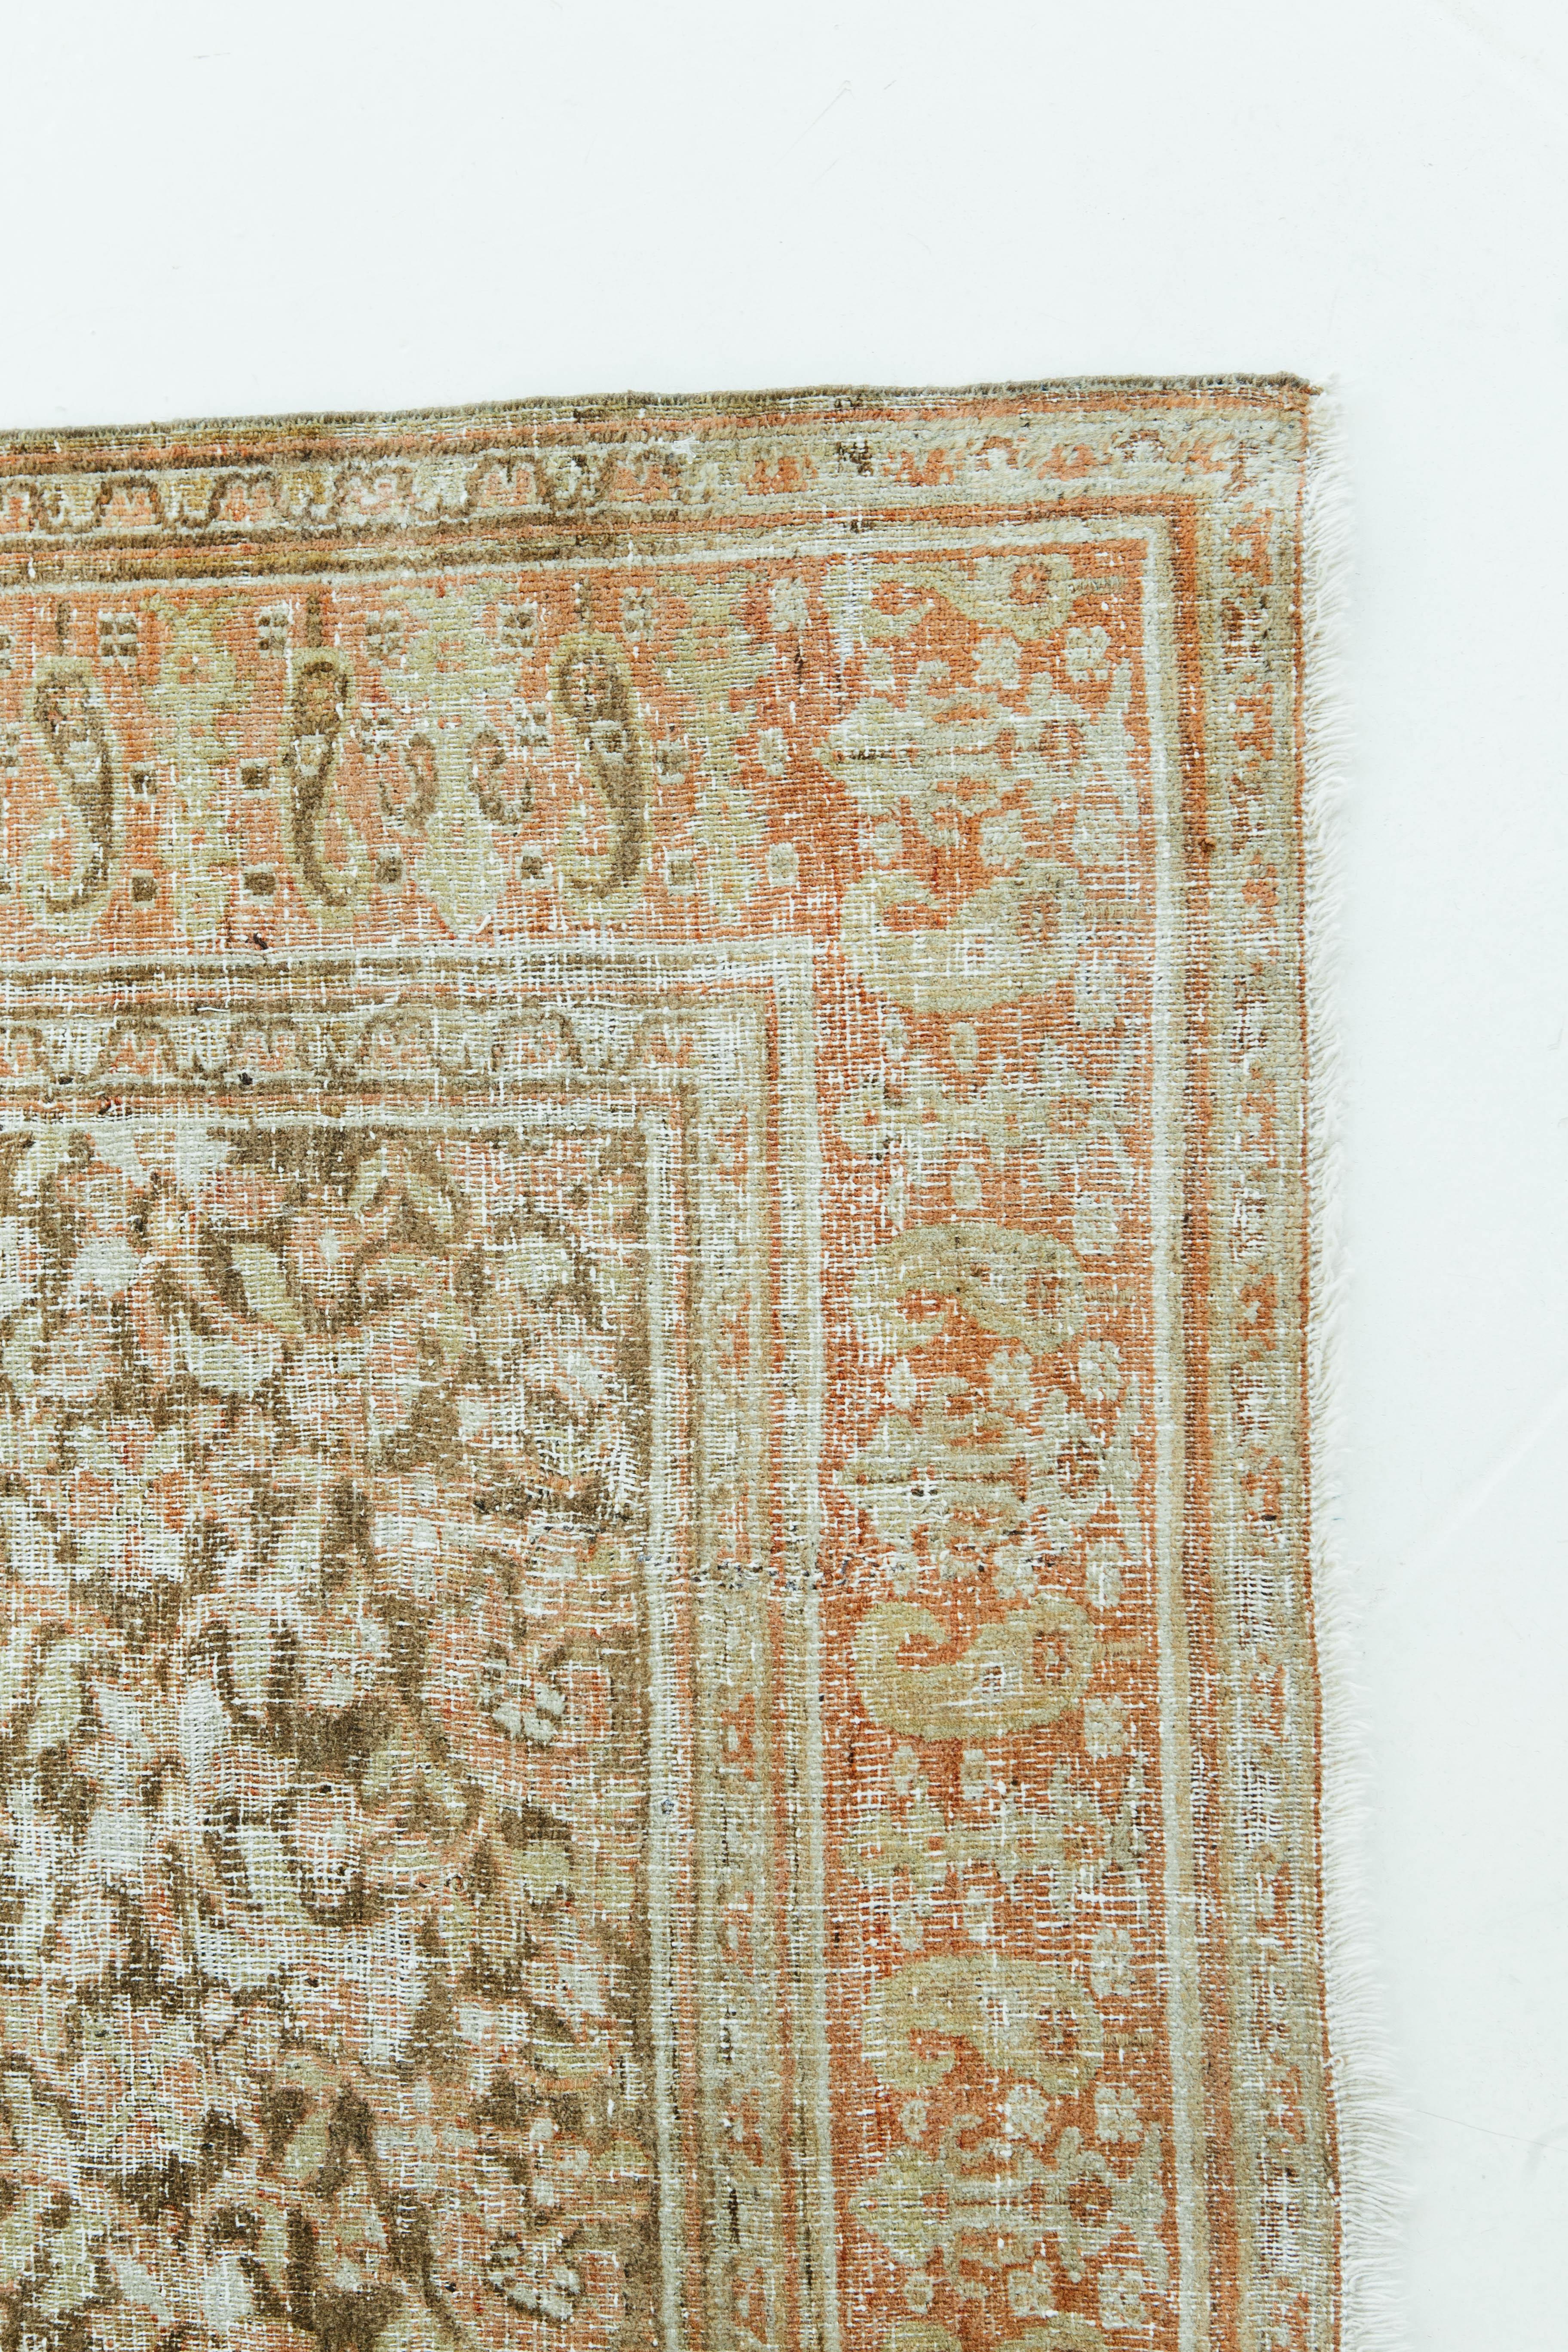 A antique Persian Doroksh finely knotted into a highly decorative piece. Doroksh rugs tend to be subtle in color and are produced in the Doroksh hills in Khorasan Province Iran. This rug's coral, golden tan, and brown colors work cohesively to